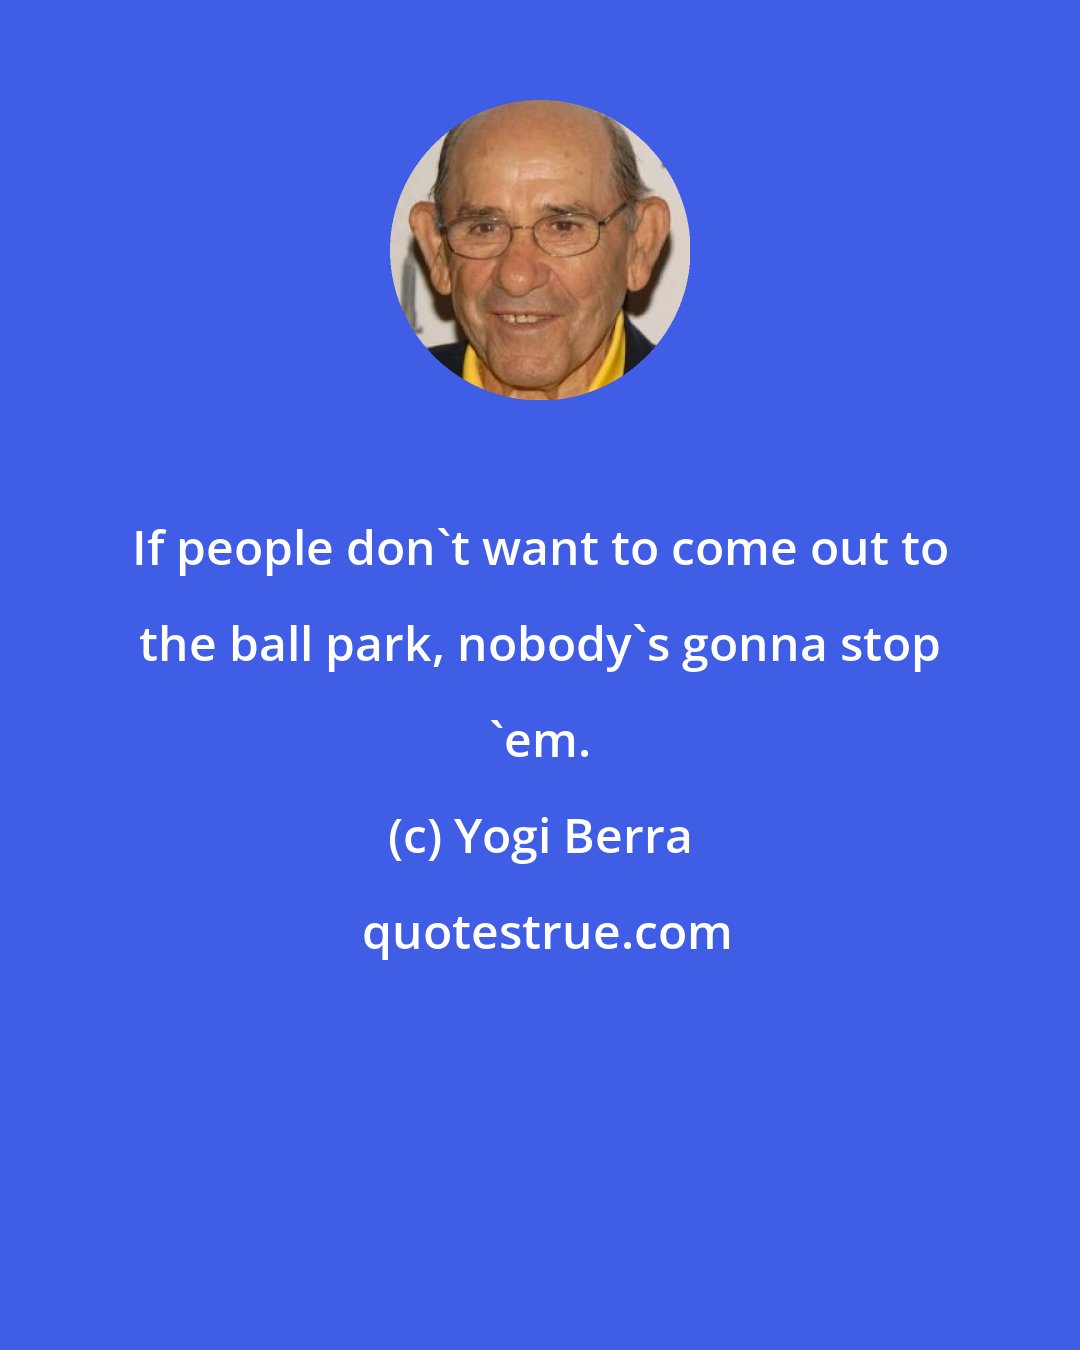 Yogi Berra: If people don't want to come out to the ball park, nobody's gonna stop 'em.